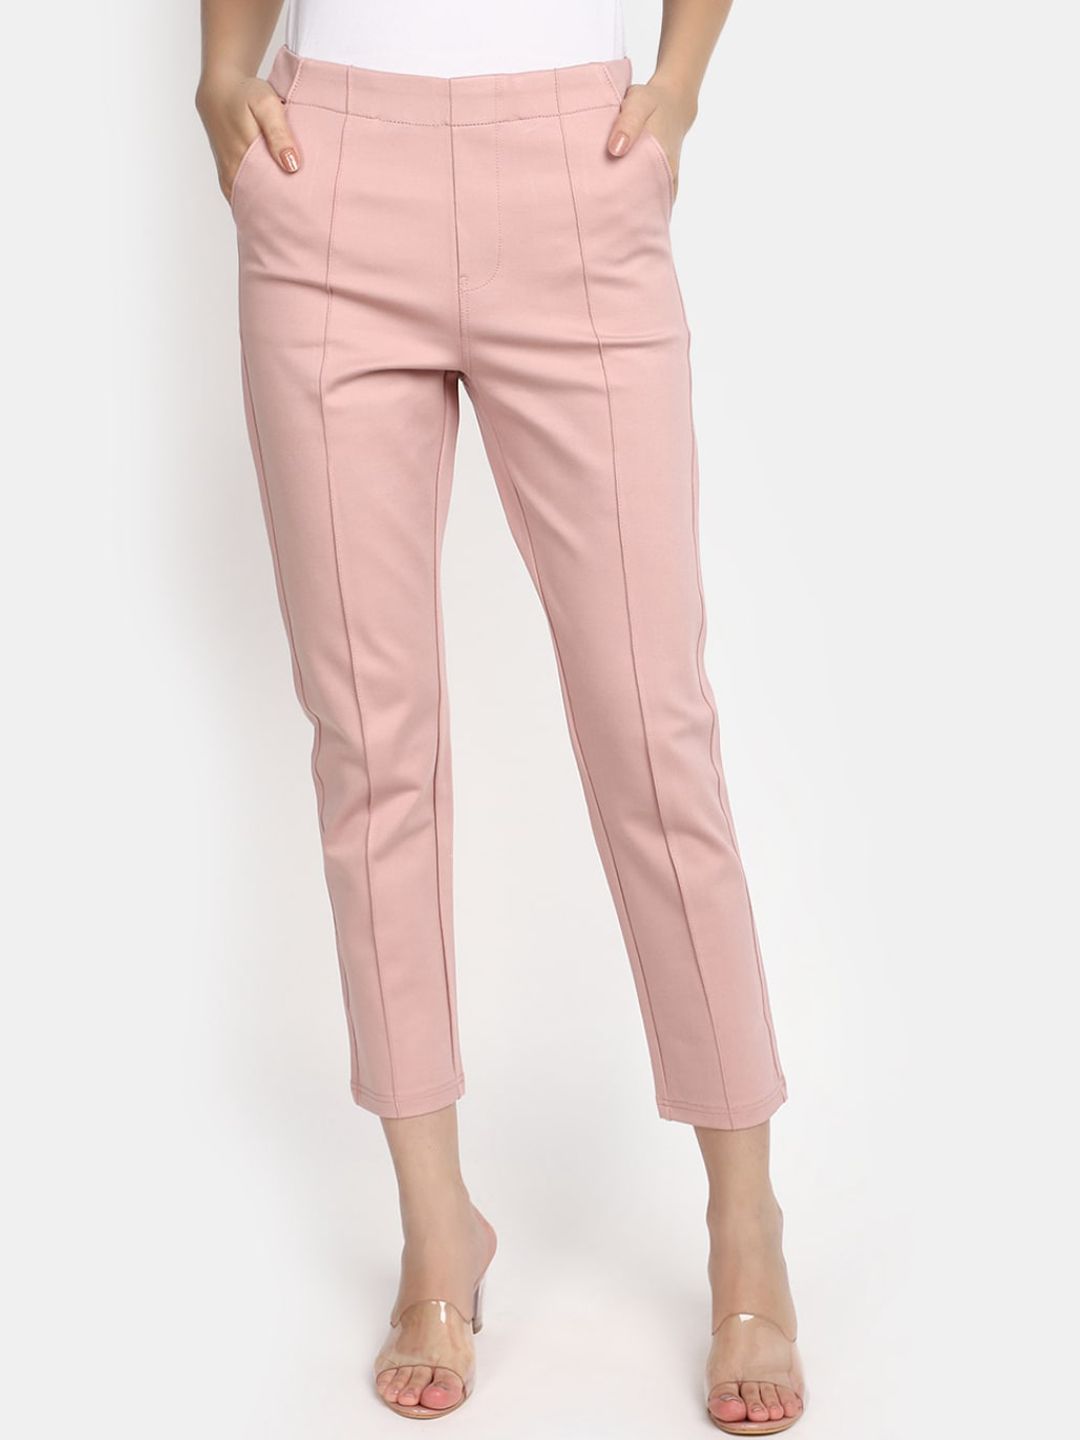 V-Mart Women Cotton Cropped Regular Trouser Price in India